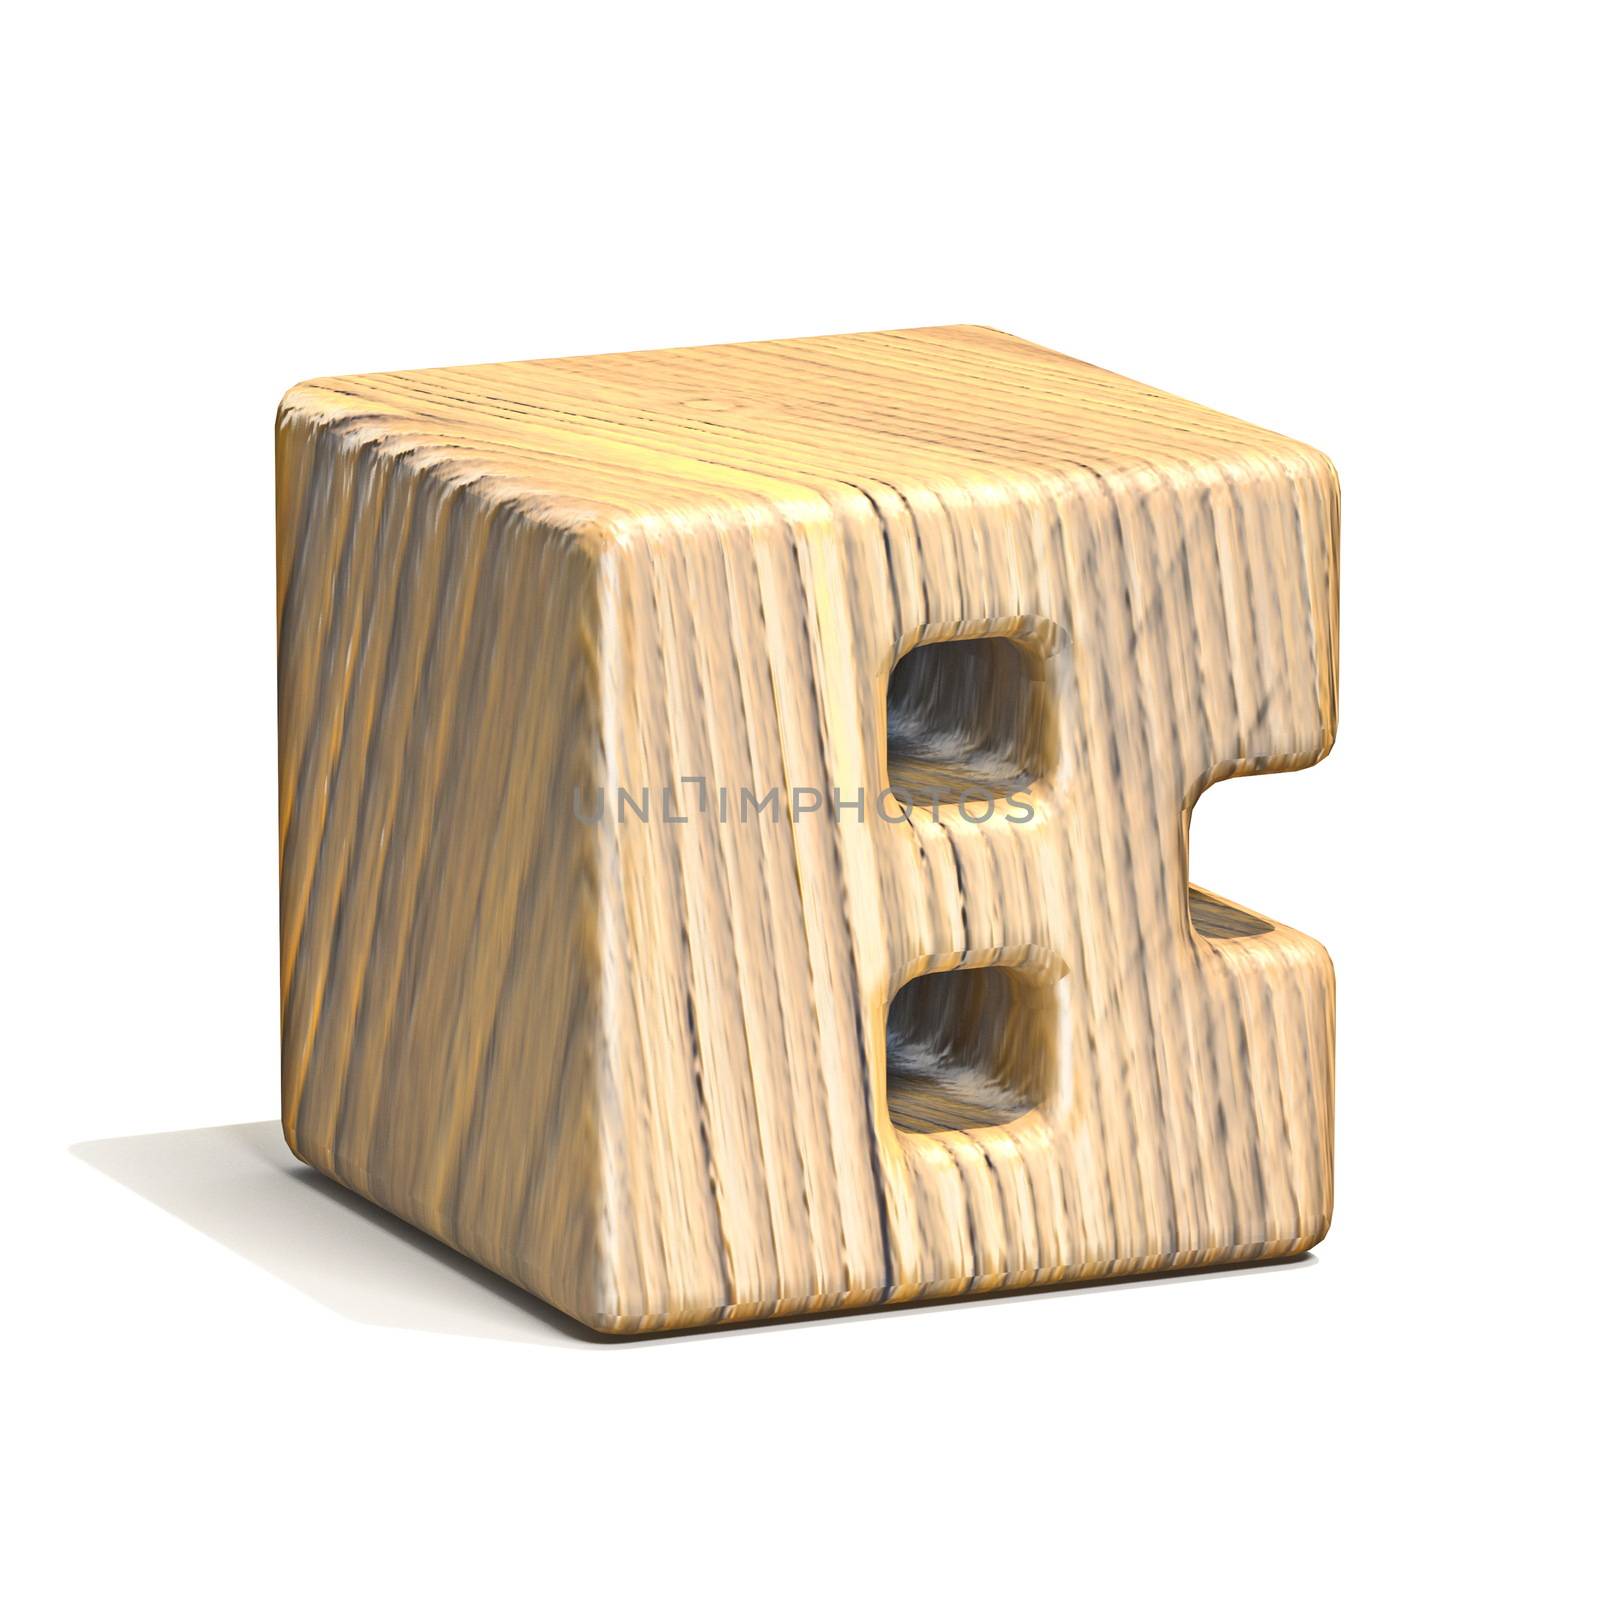 Solid wooden cube font Letter B 3D by djmilic